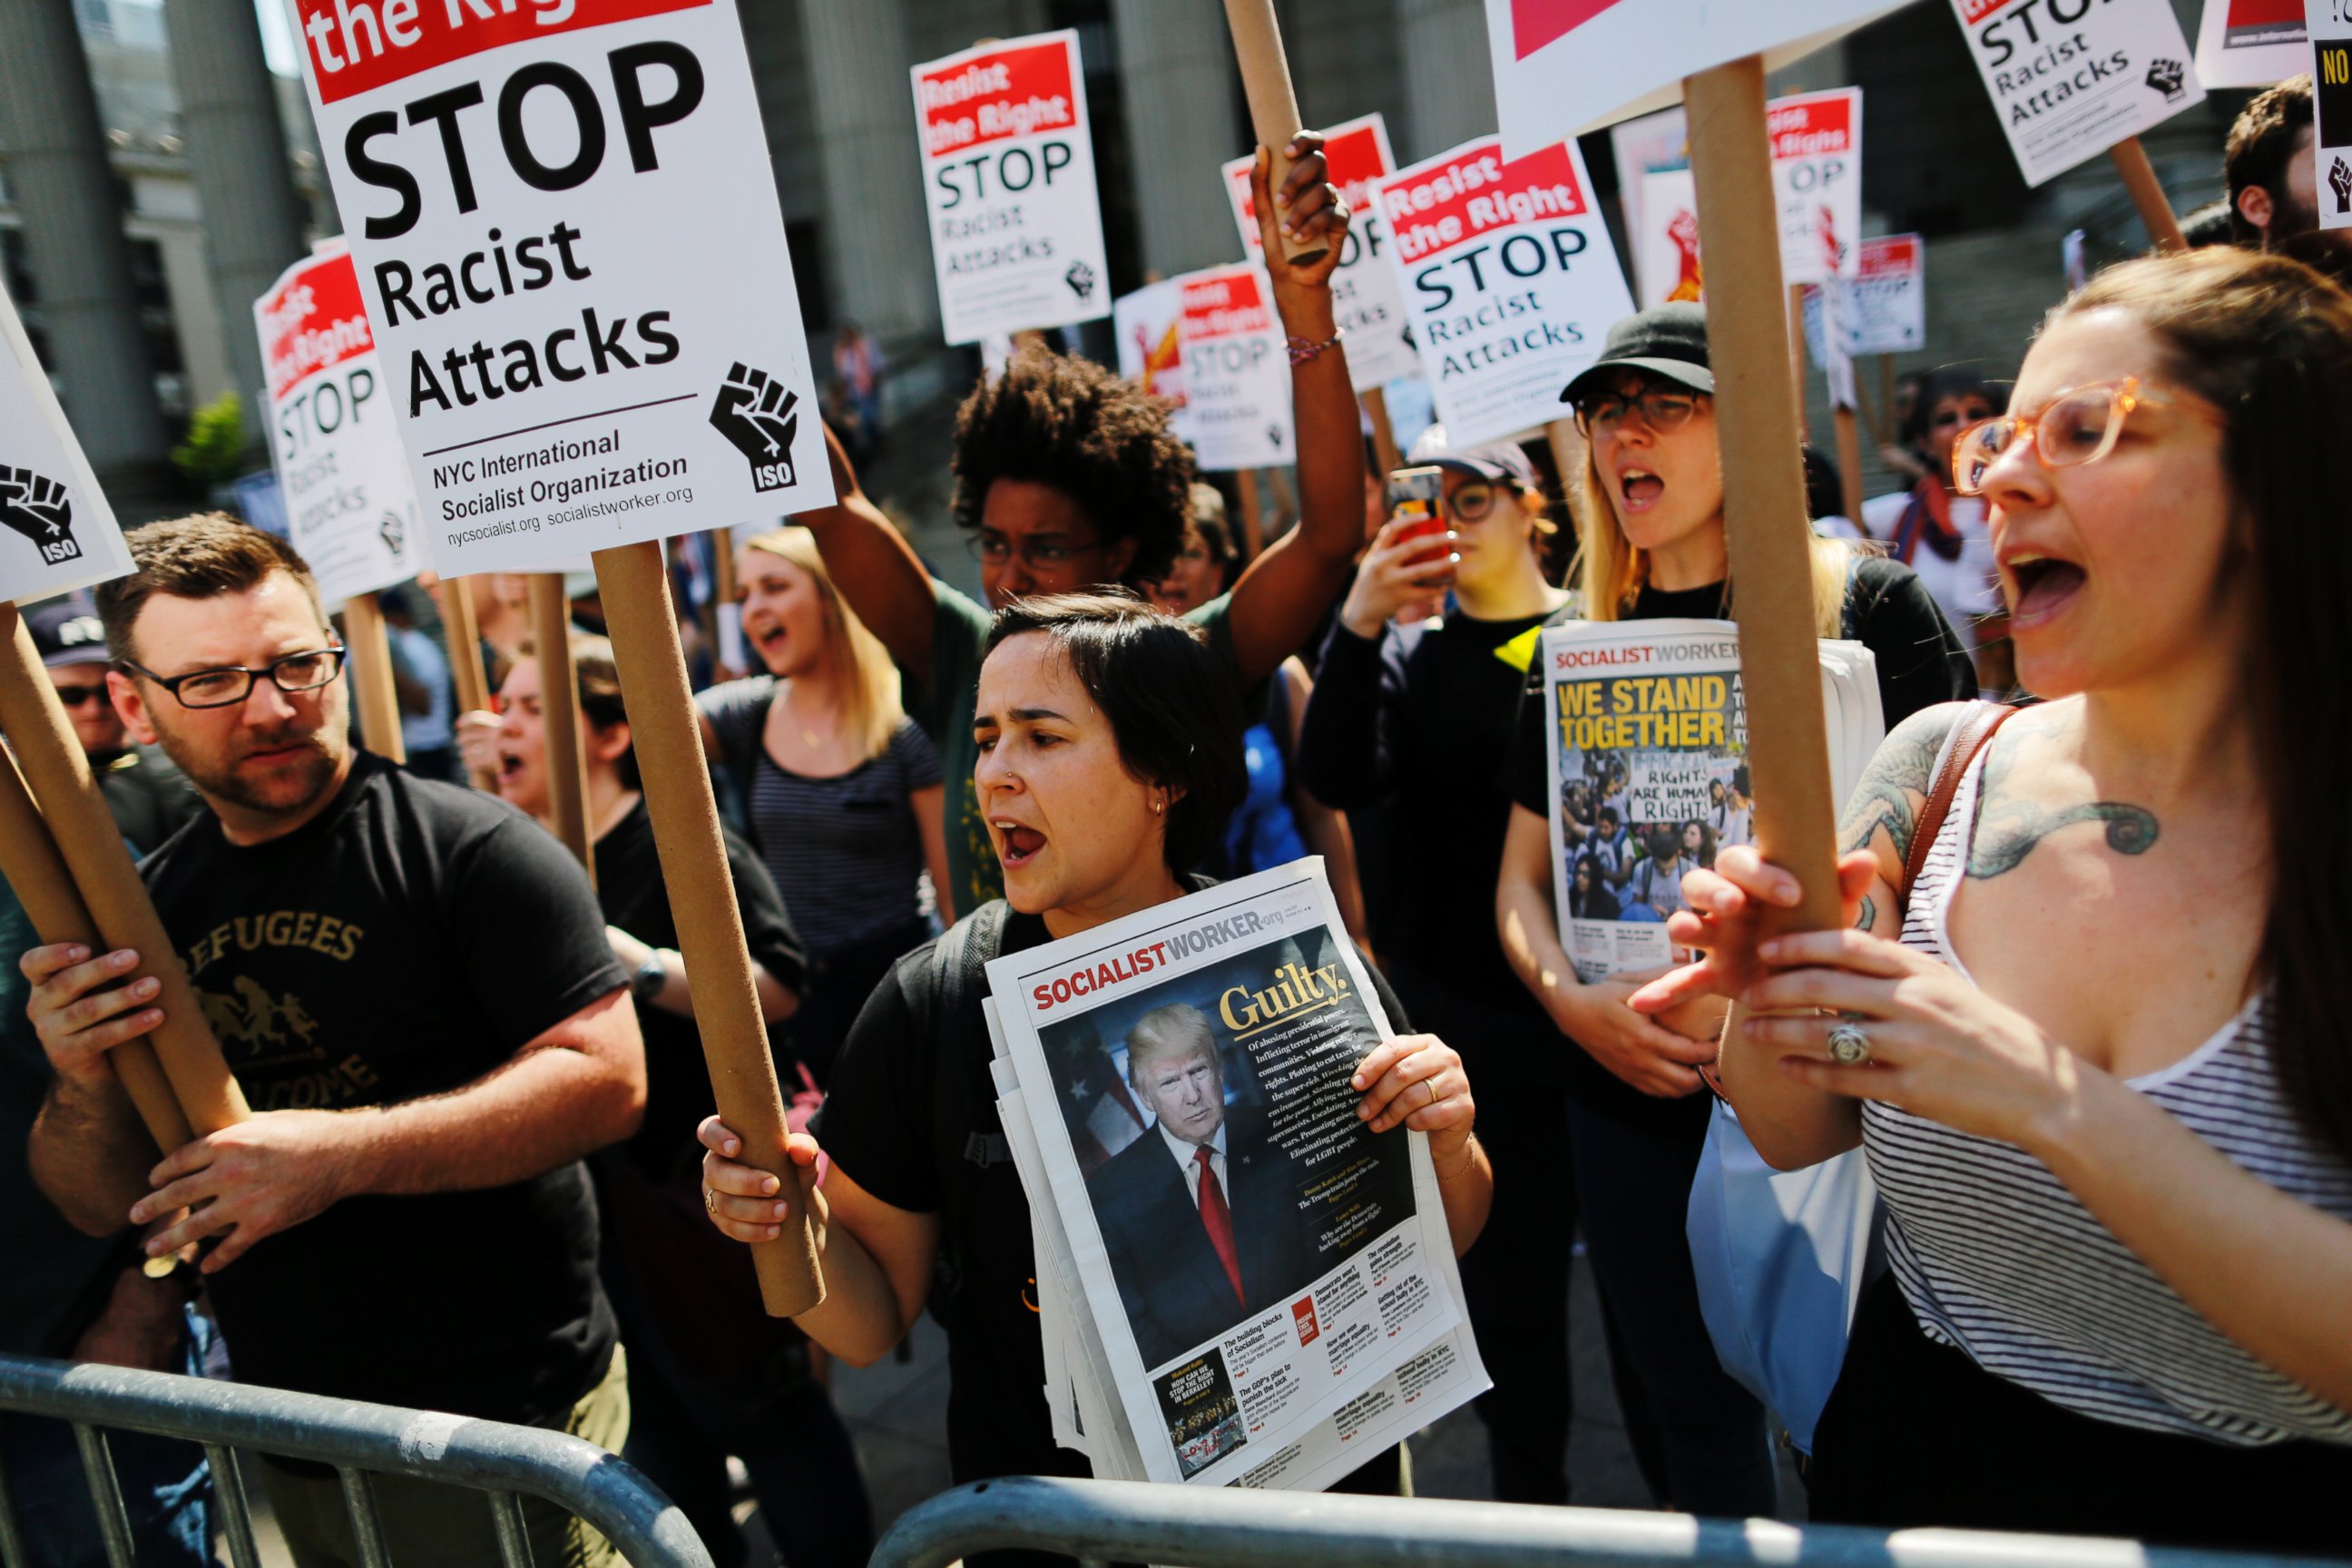 PHOTO: People march and shout slogans in support of Muslim community as activists take part in the "March Against Sharia" on June 10, 2017 in New York City. 